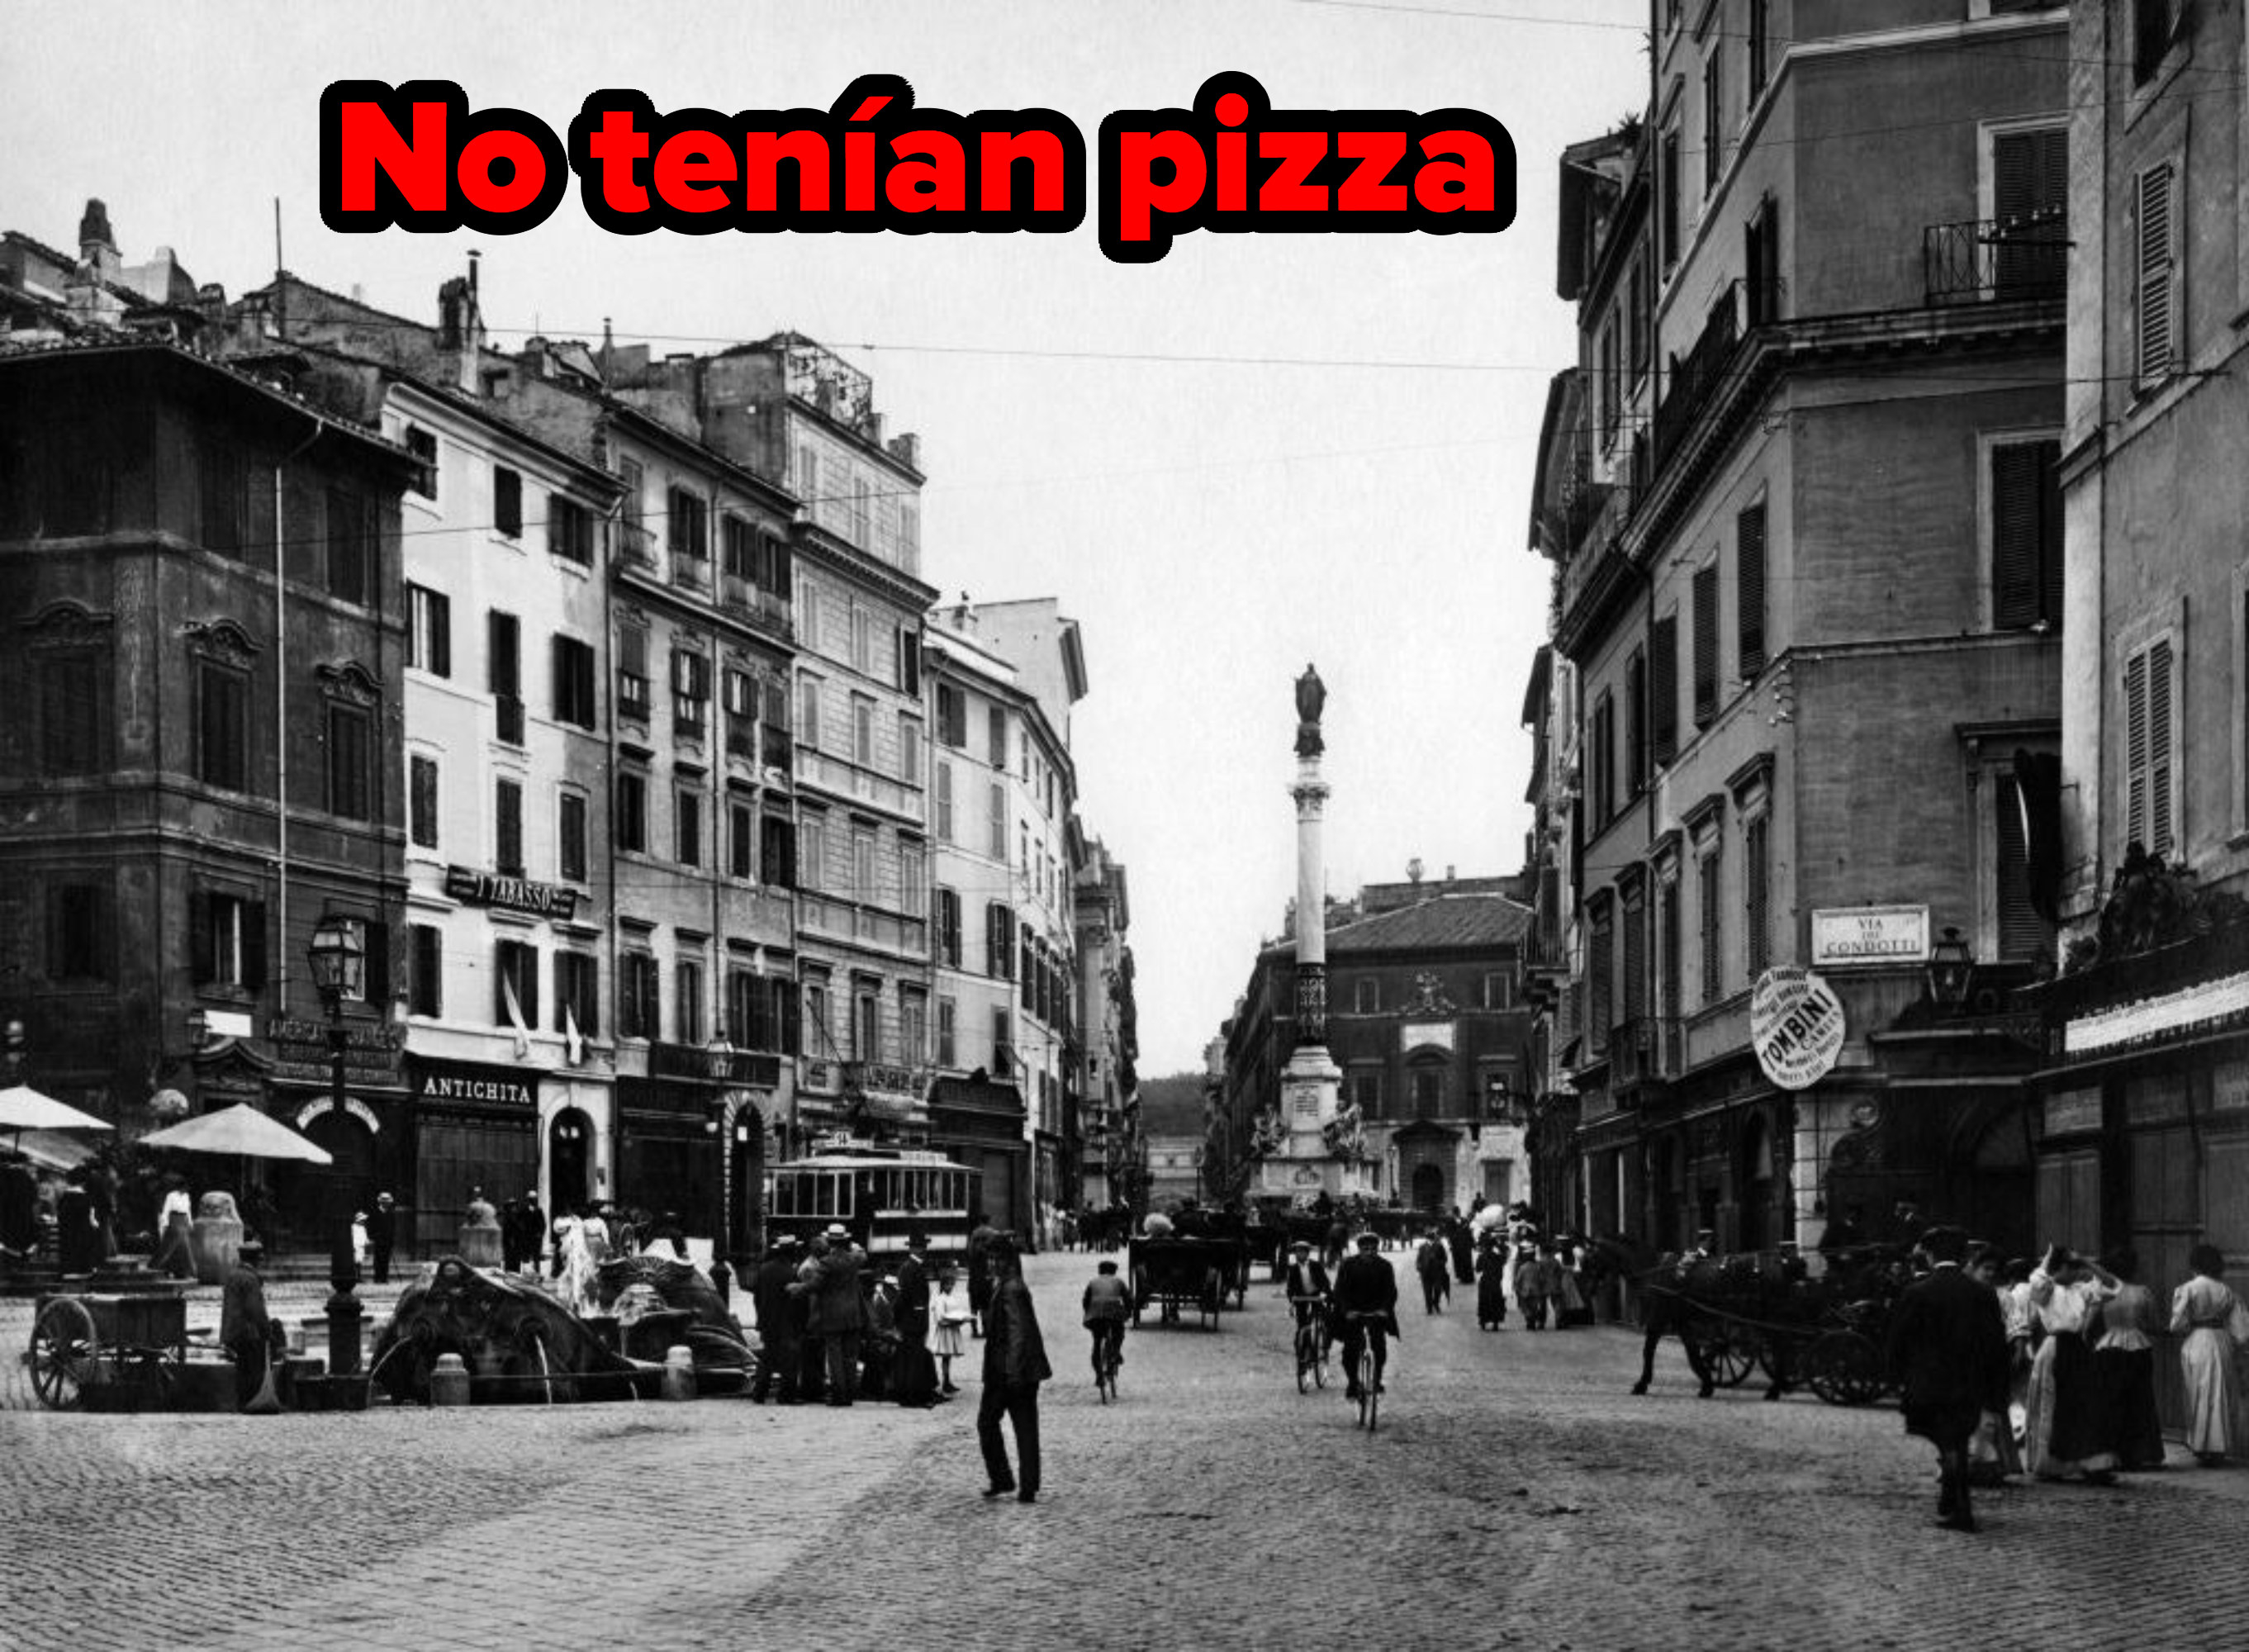 Had no pizza written over Rome in the 1910s